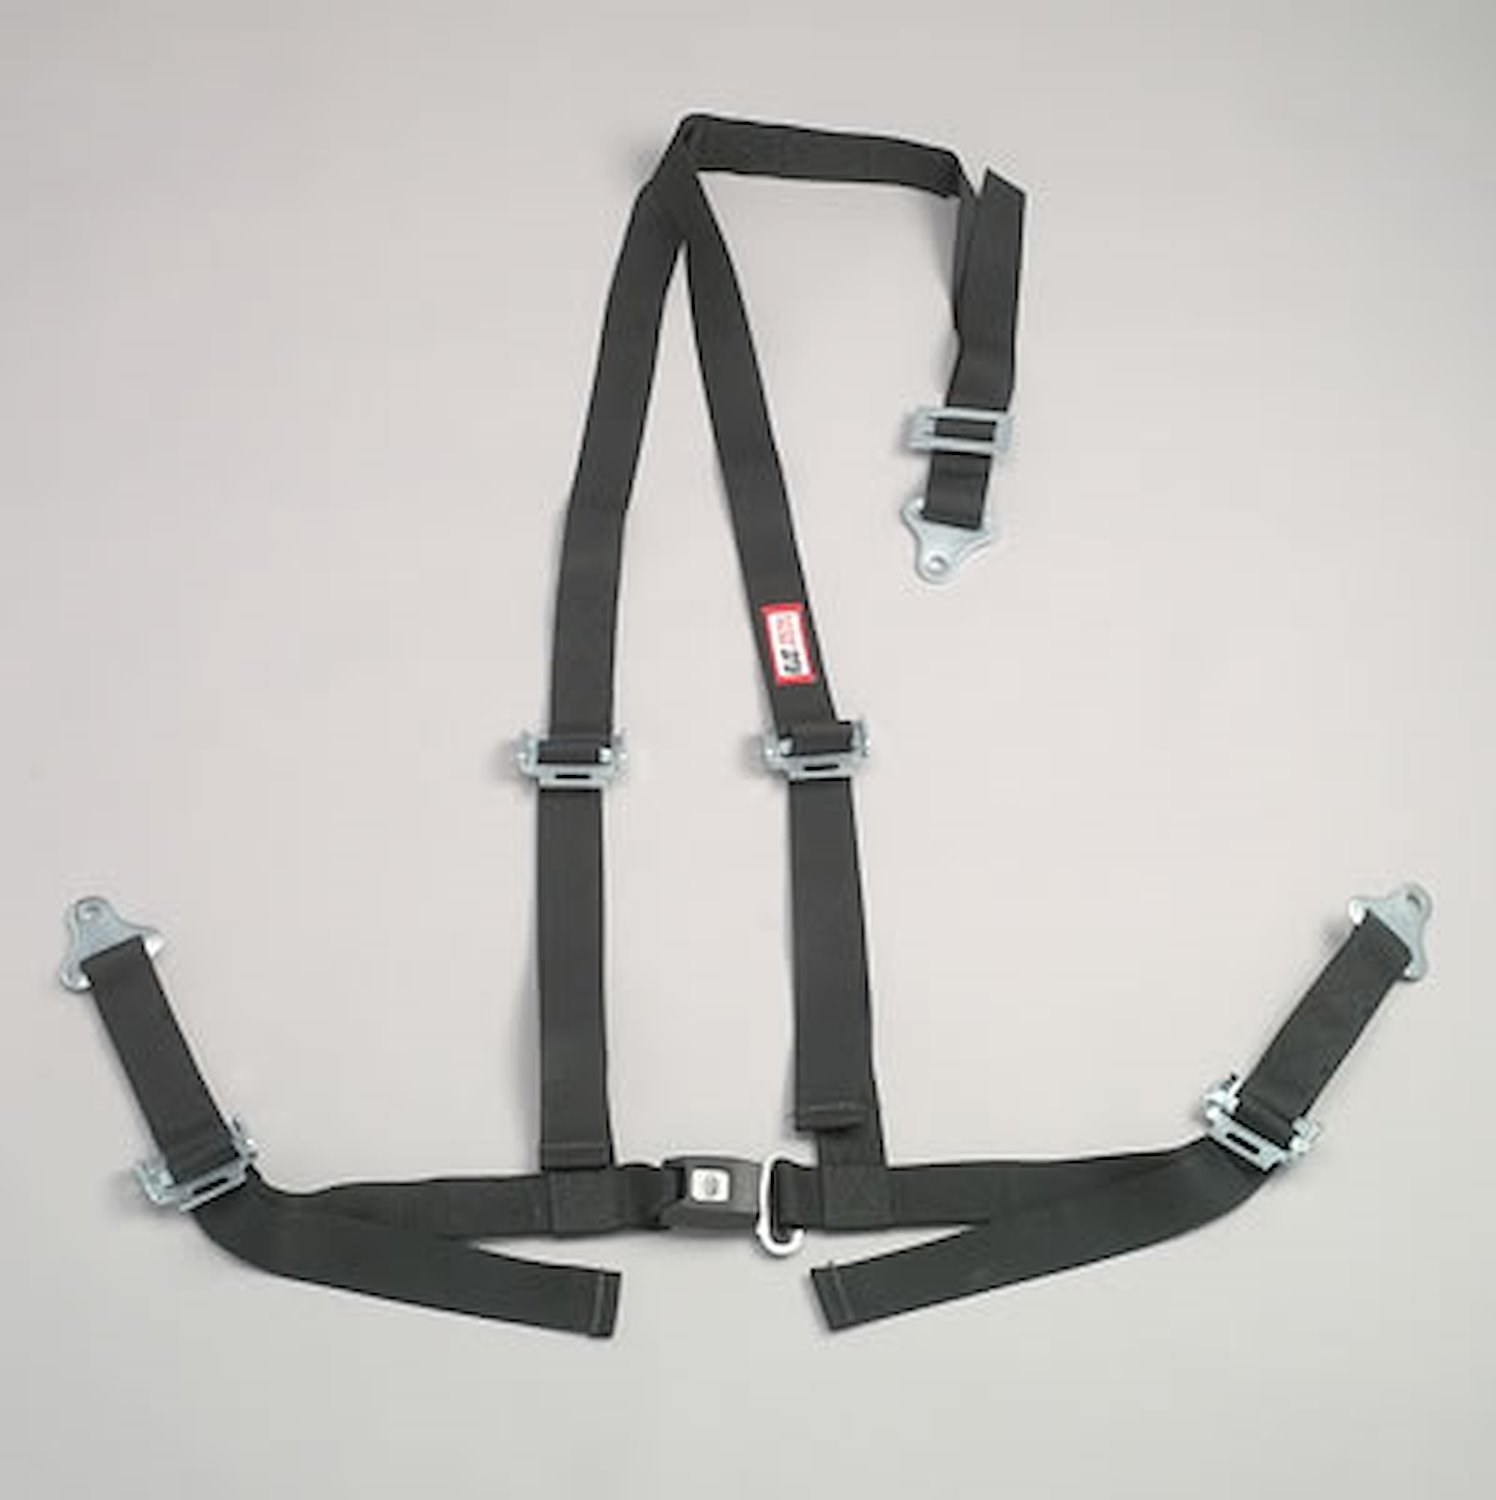 NON-SFI B&T HARNESS 2 PULL UP Lap Belt SNAP 2 S. H. Y FLOOR Mount WRAP/BOLT RED